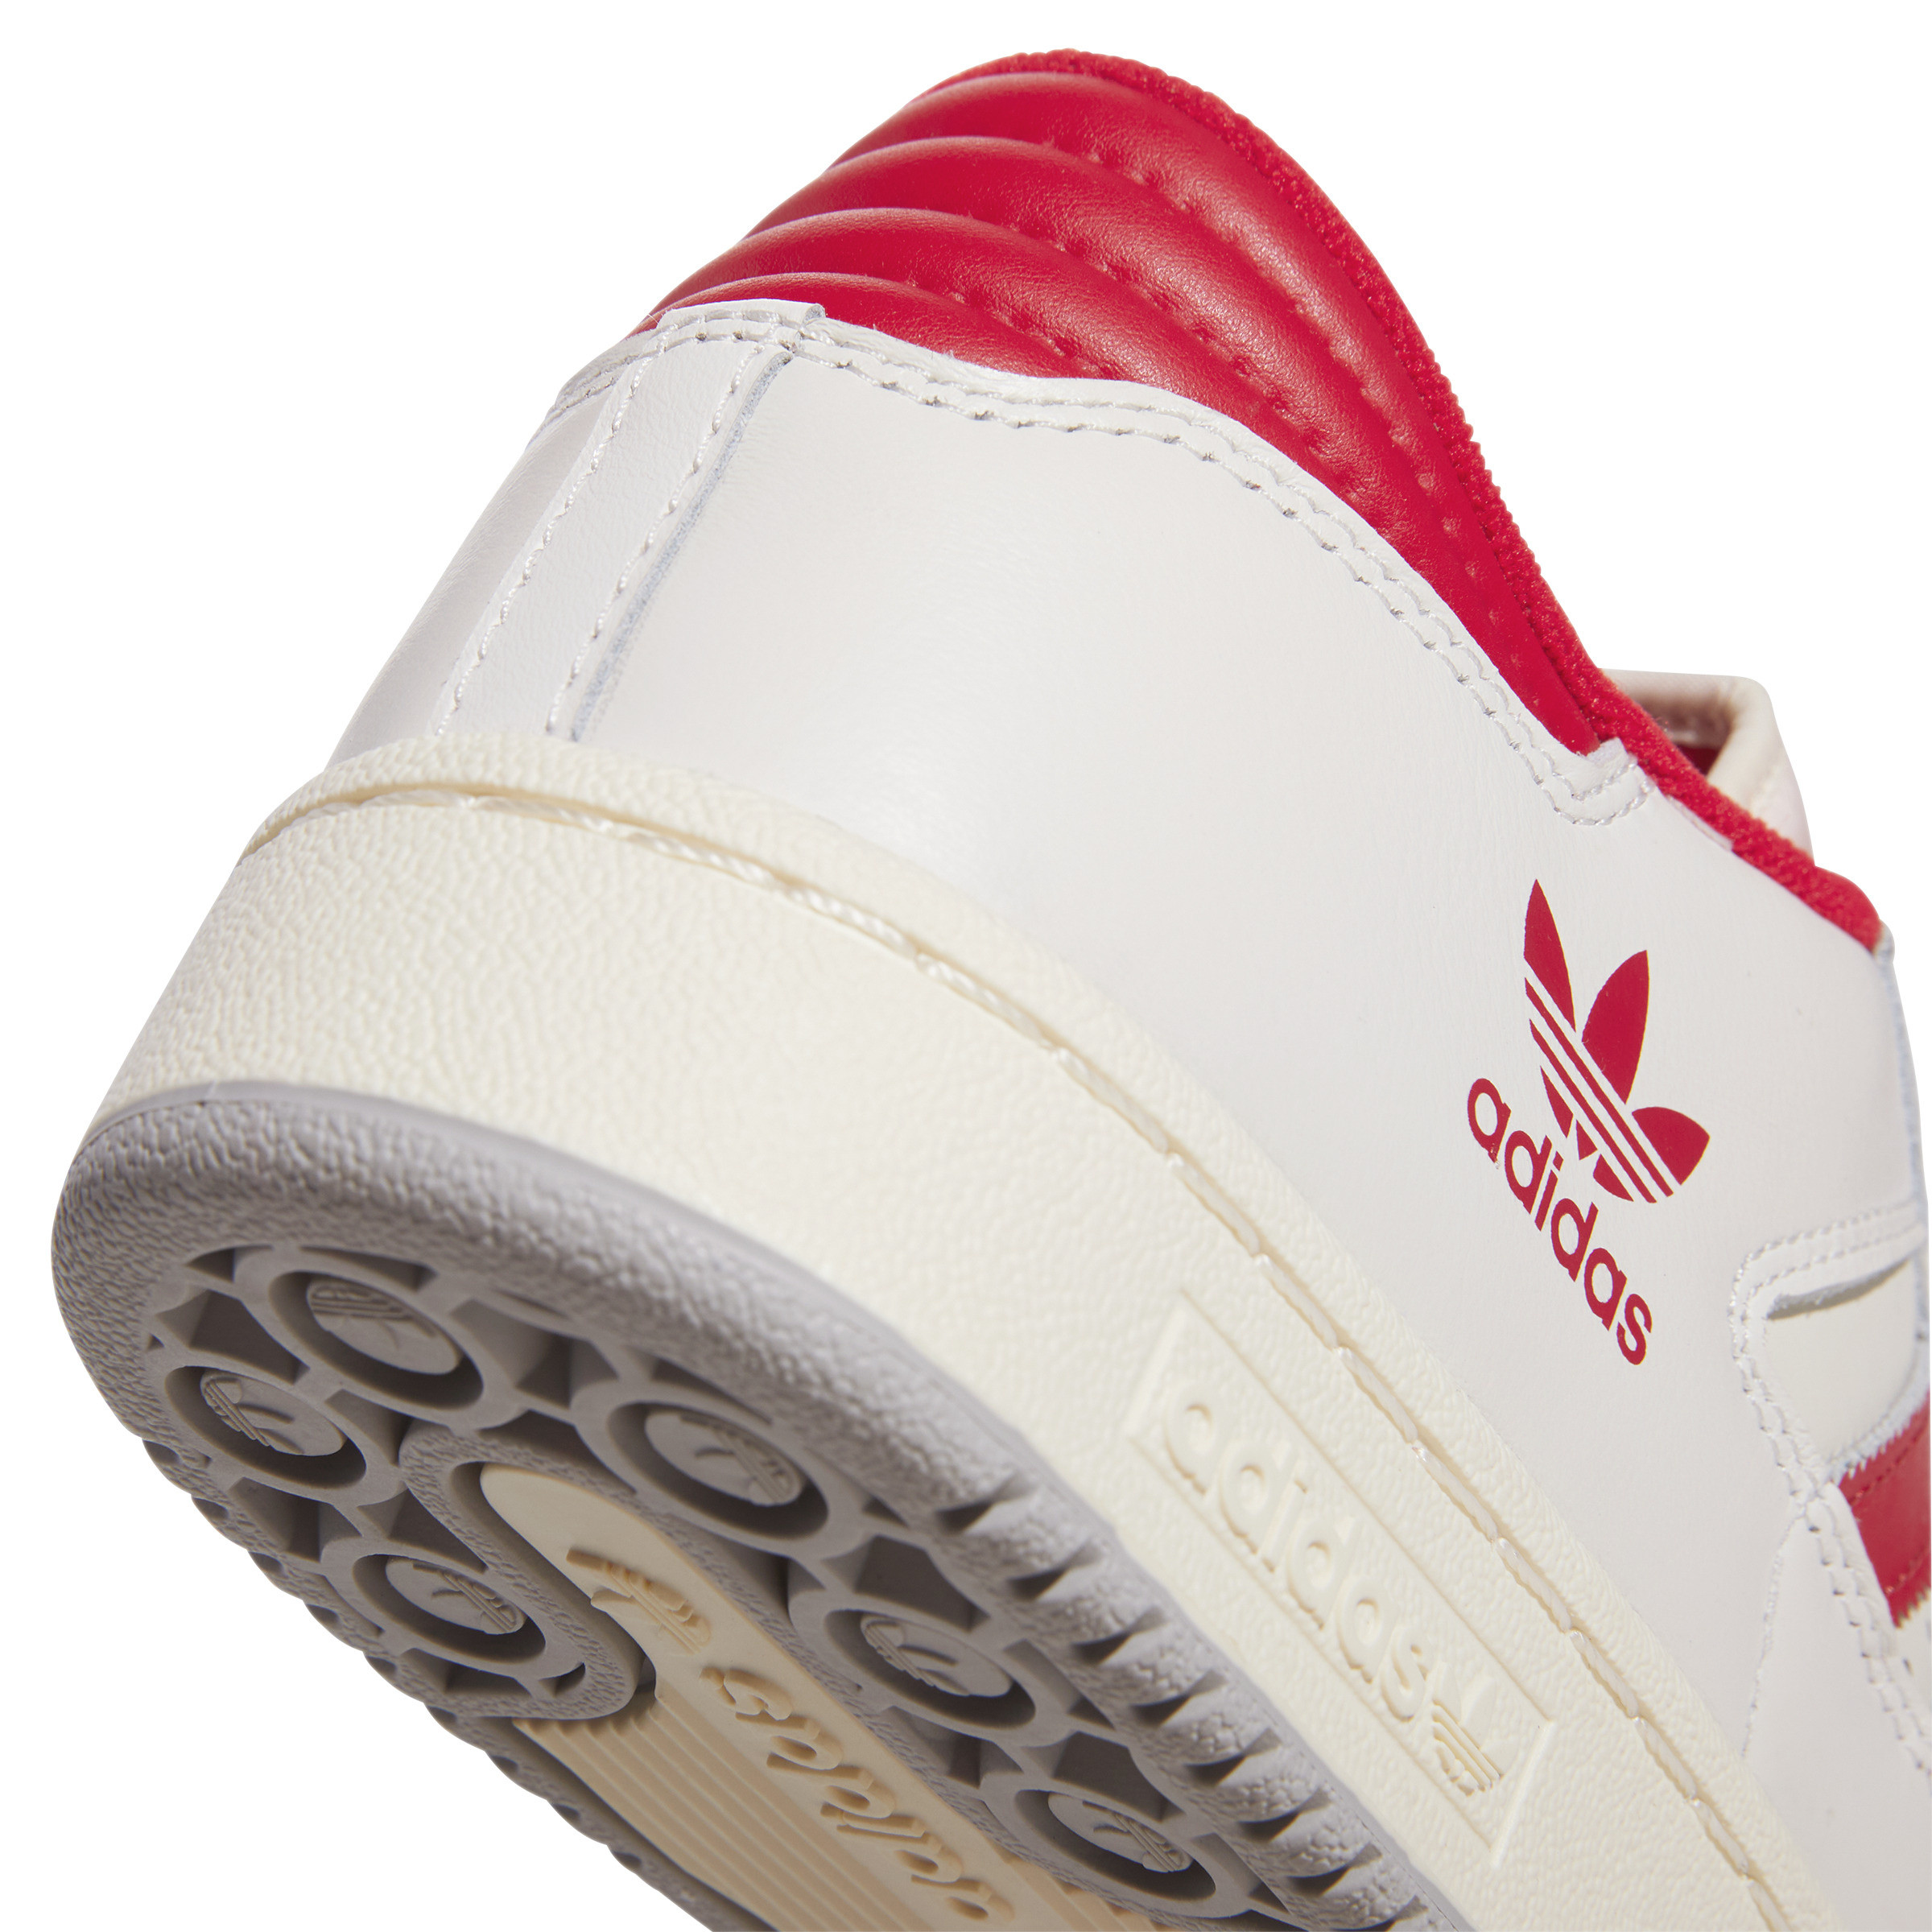 Adidas - Centennial 85 low shoes, White, large image number 5